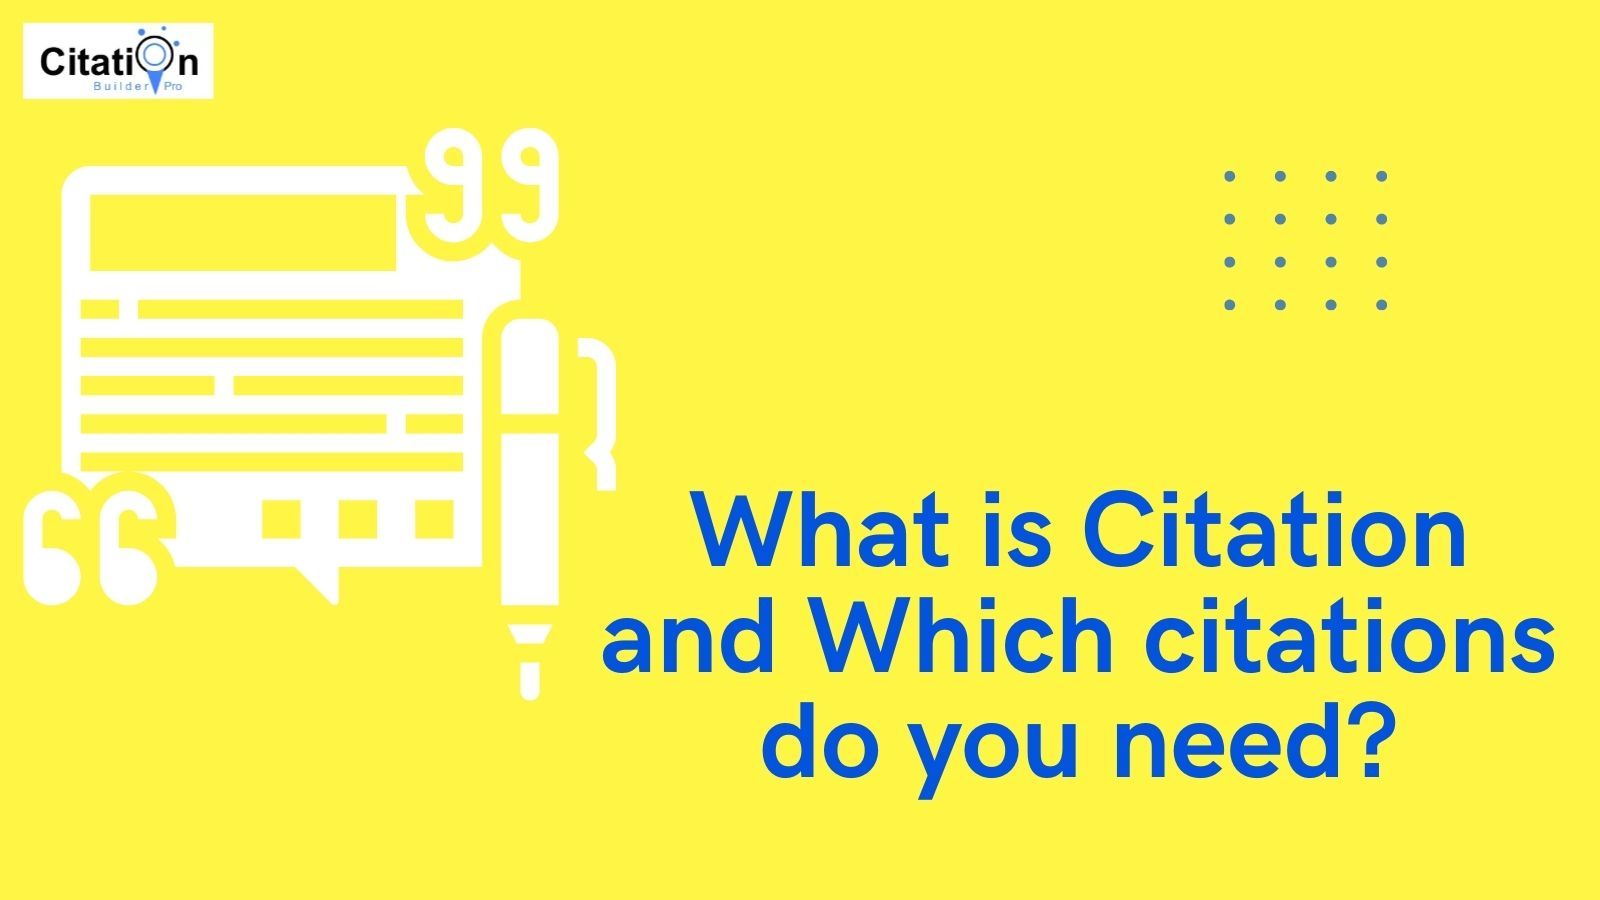 What is Citation and Which citations do you need